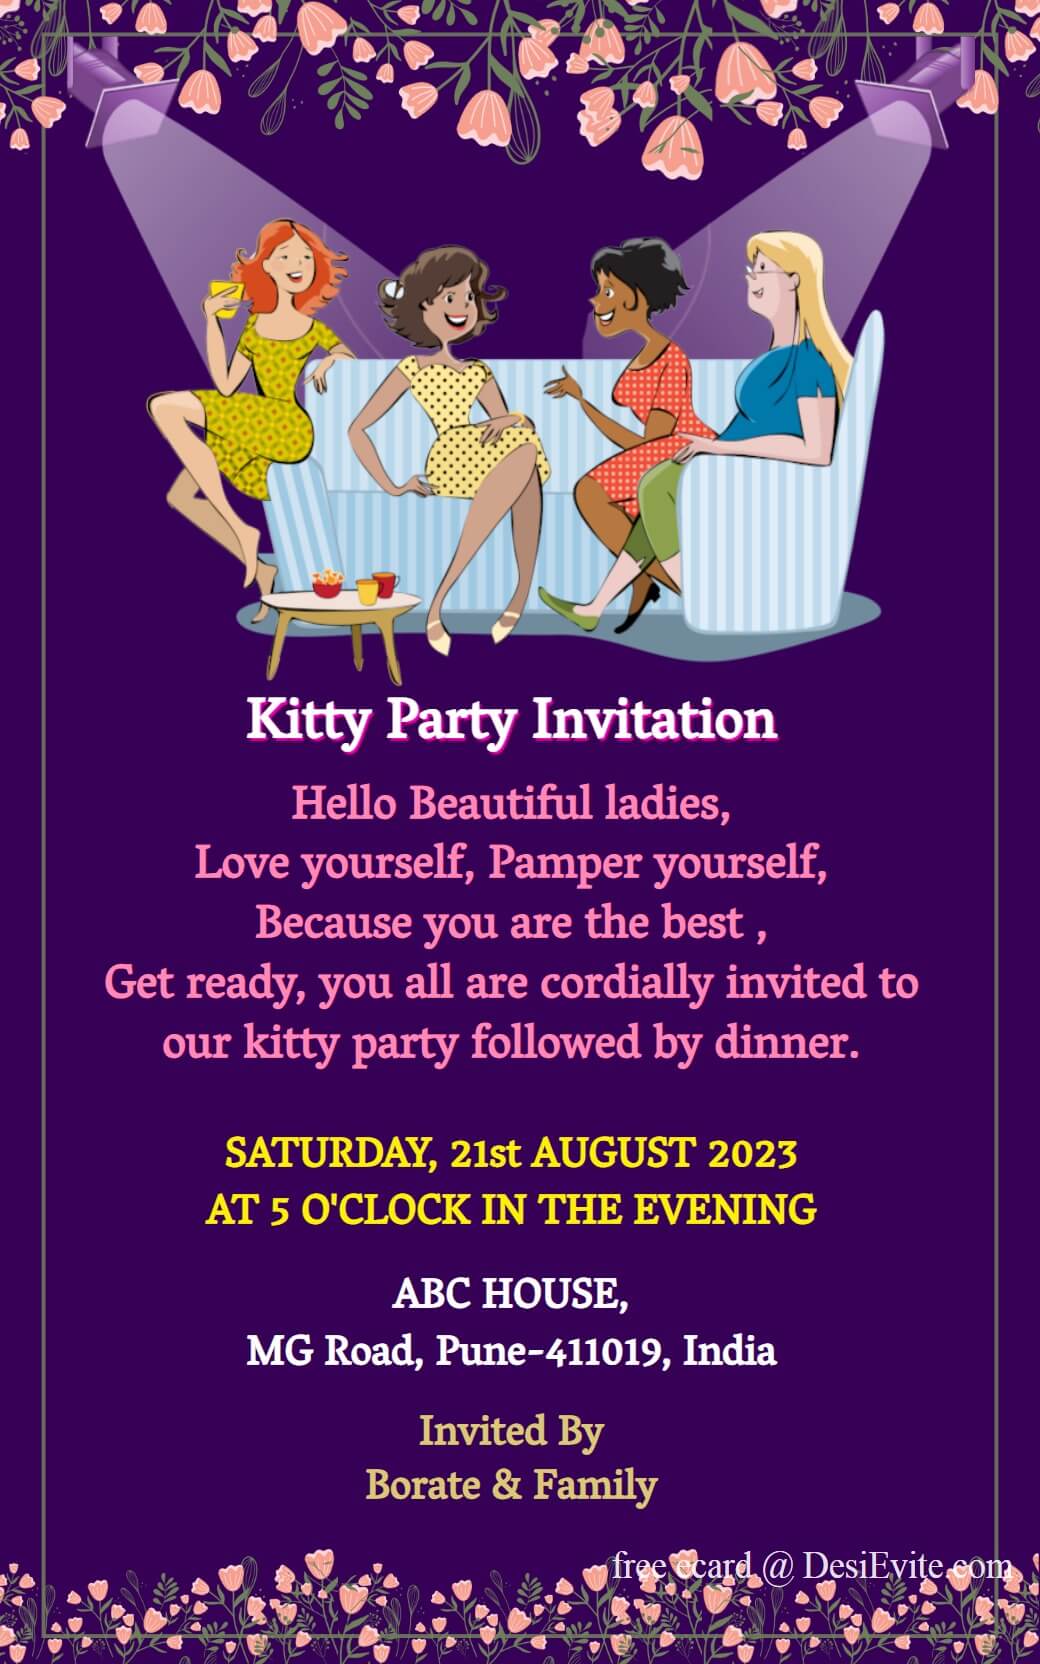 kitty party invitation card floral theme 44 